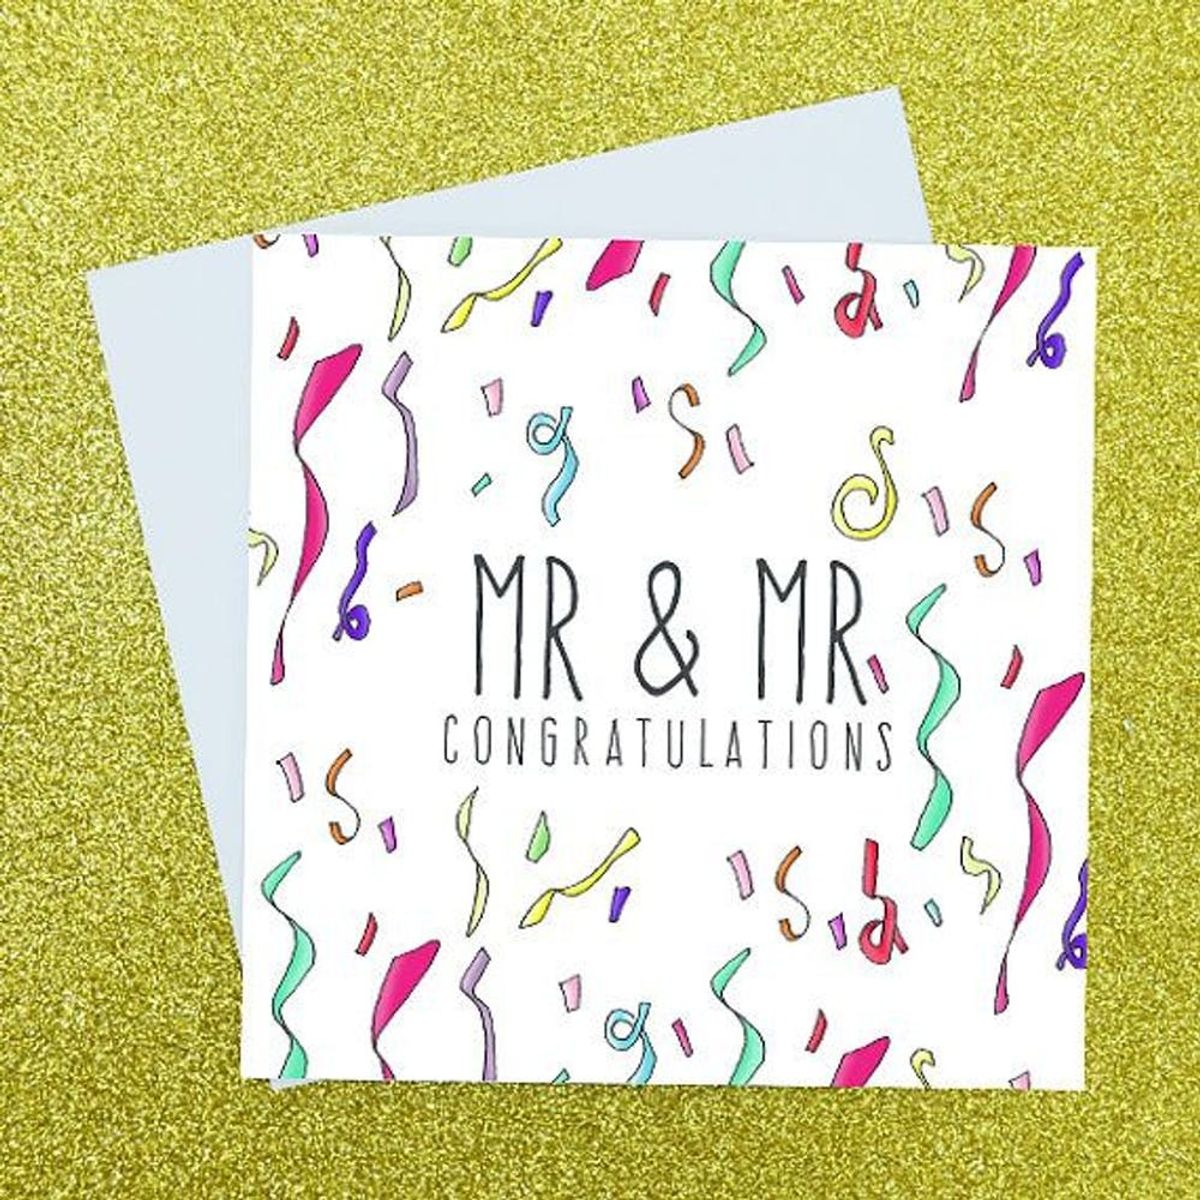 16 Sweet Wedding Cards for the Happy Couple